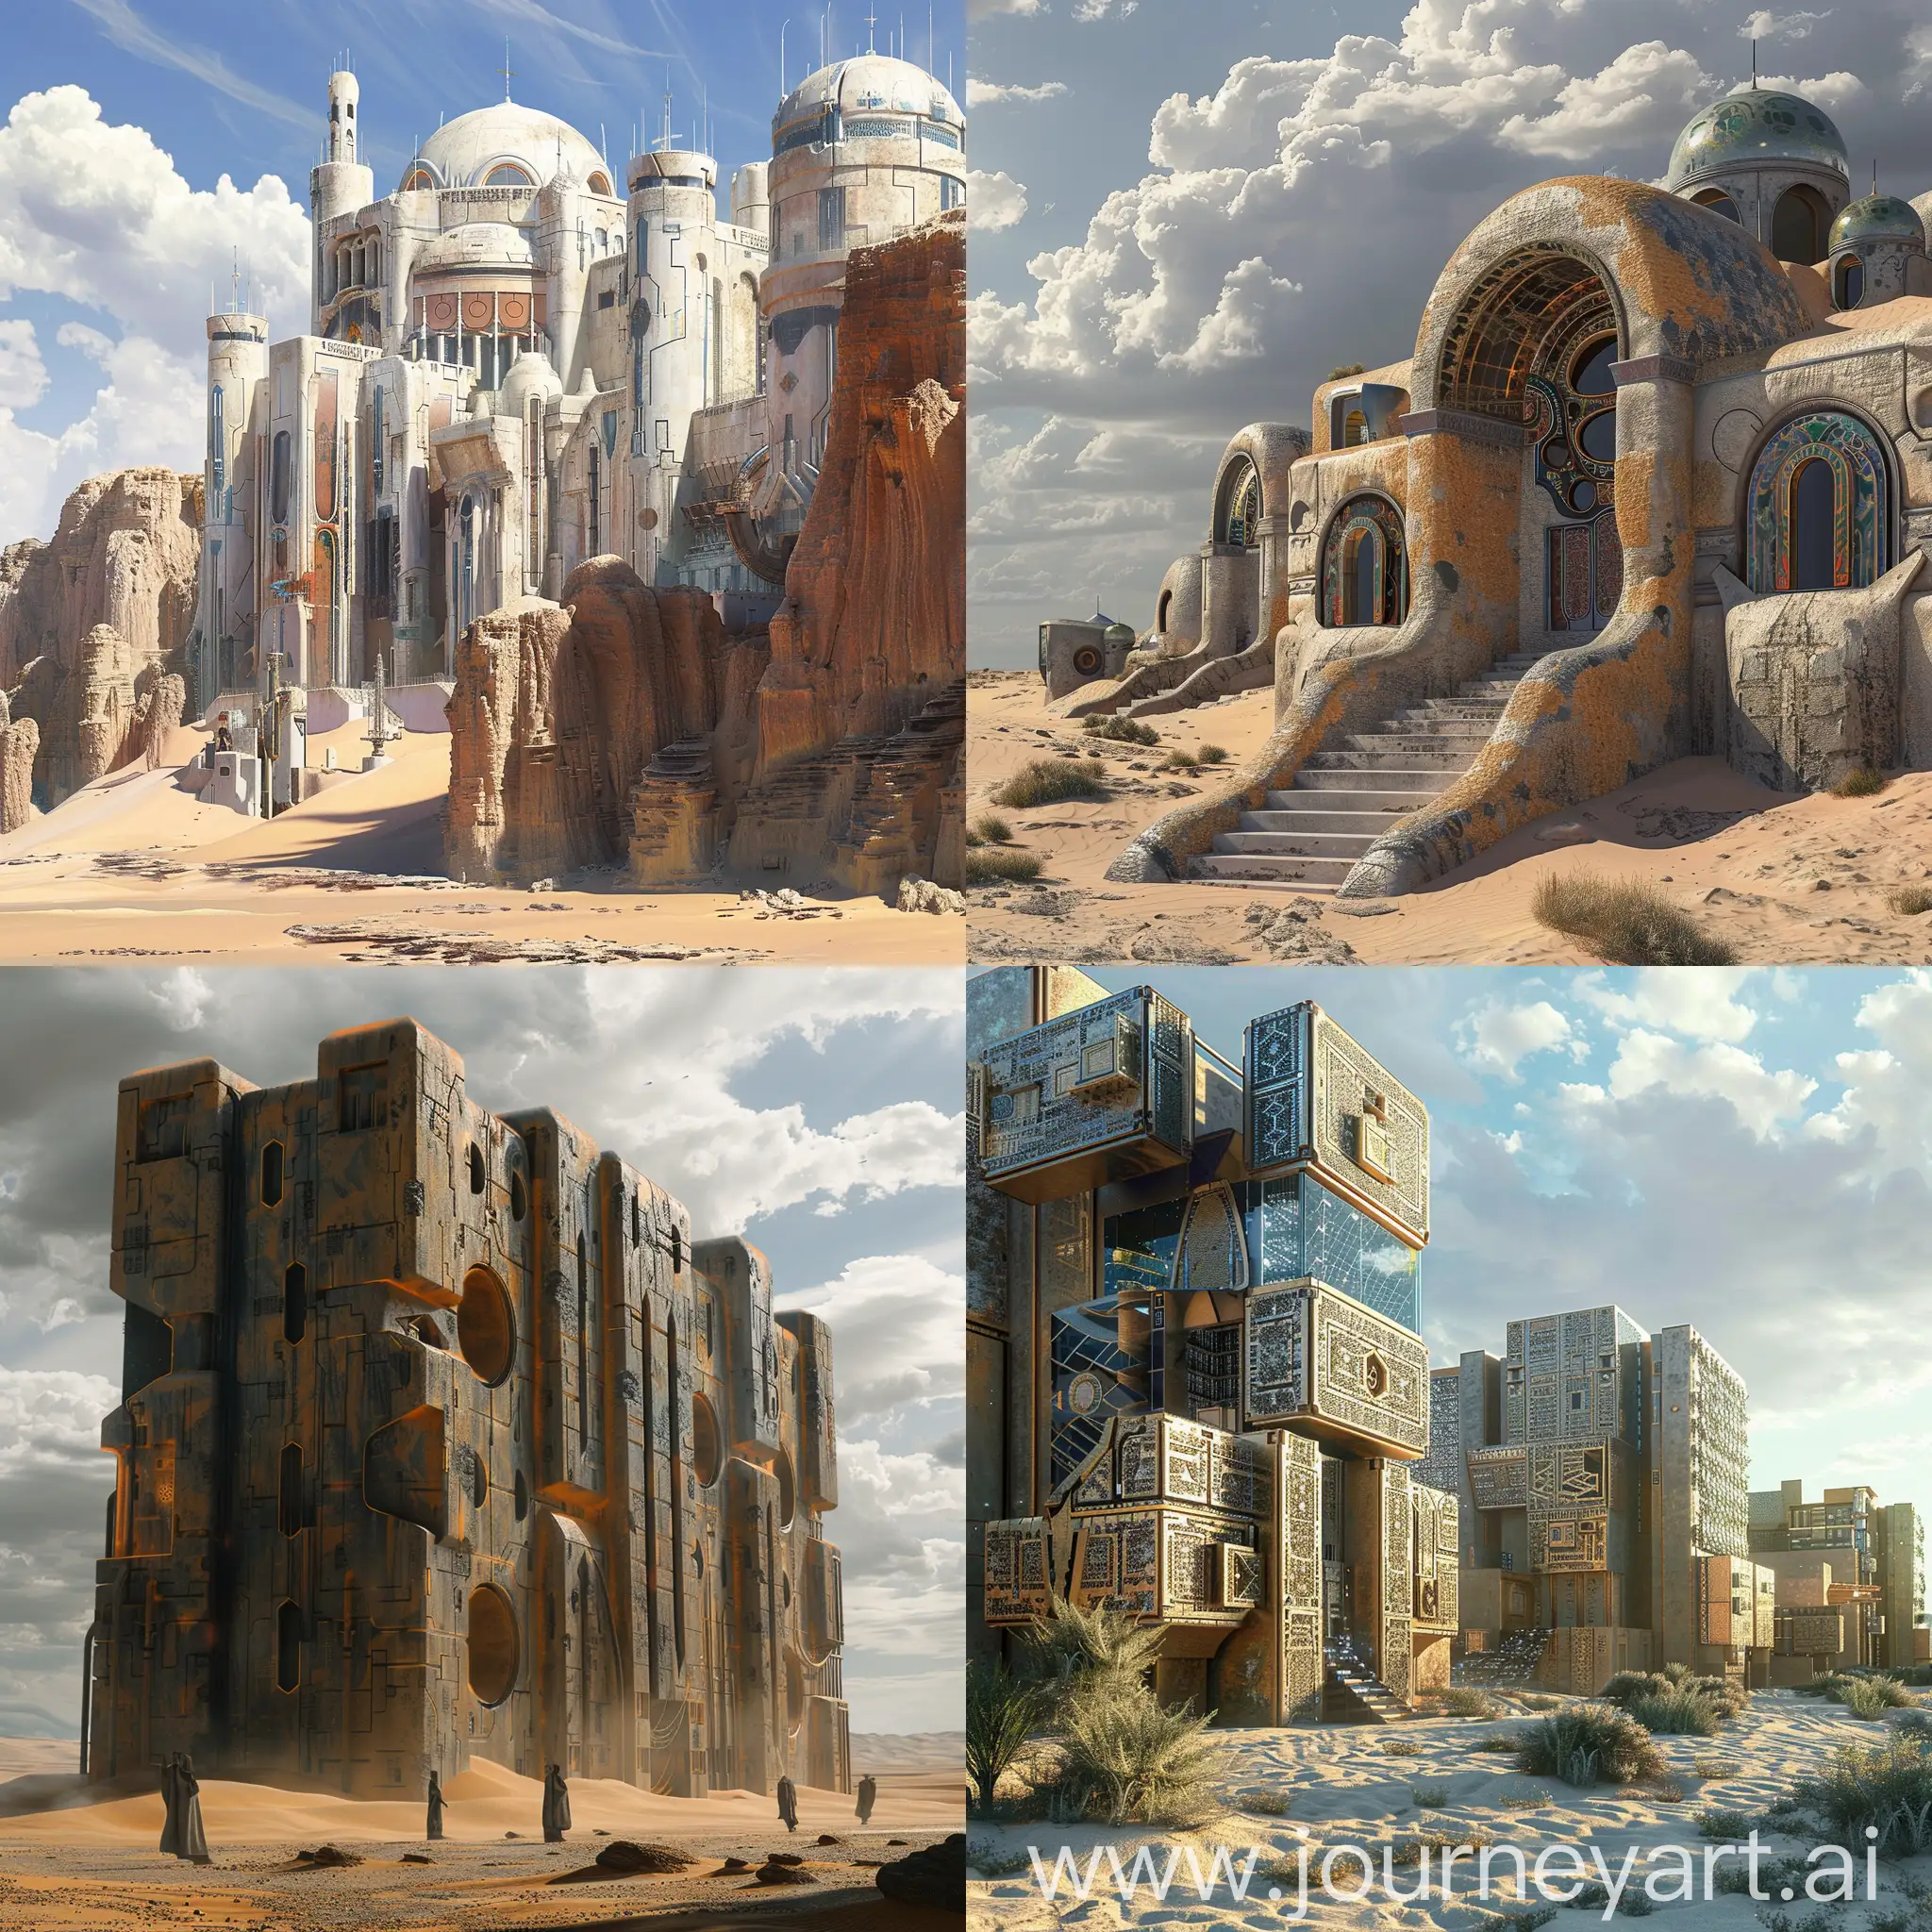 Sci fi buildings in the desert from the outside inspired by Silk Road architecture. Buildings must be squared